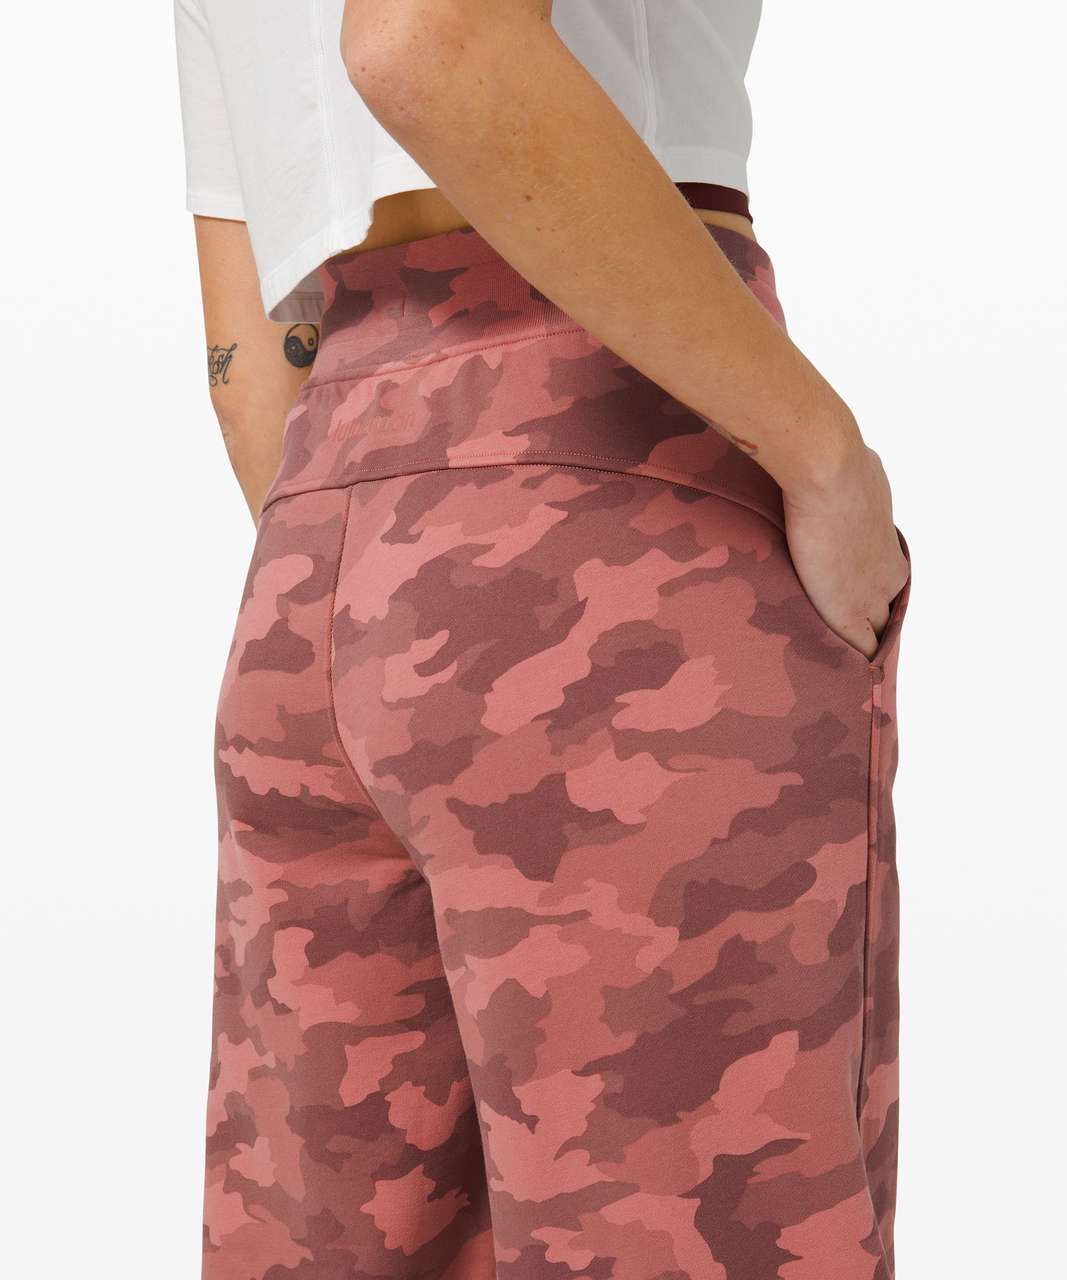 Lululemon Relaxed Fit French Terry Jogger - Heritage 365 Camo Brier Rose Multi